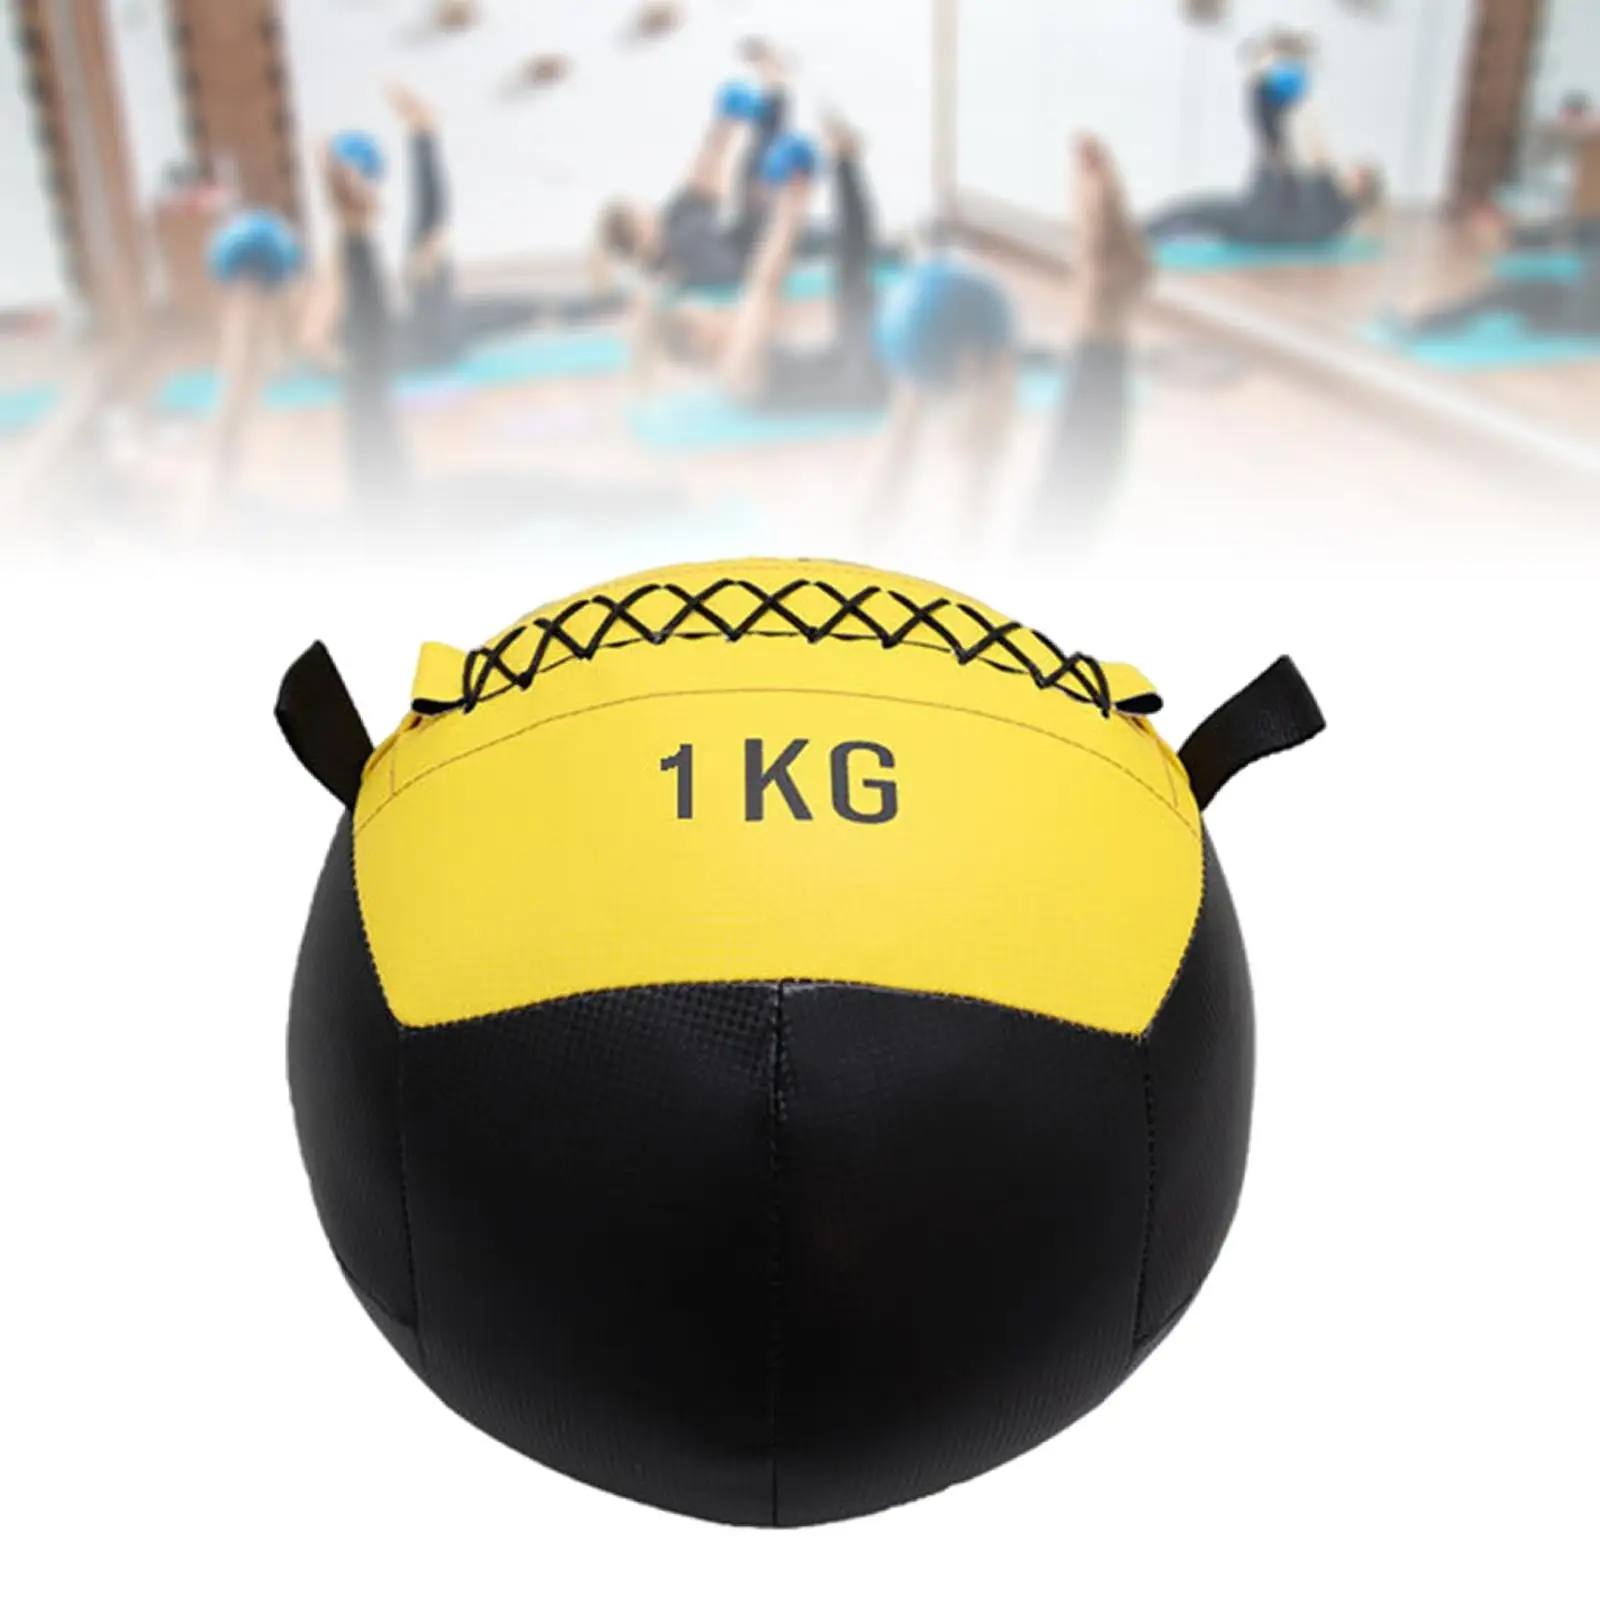 Balance Workout Exercise Fitness Weight Medicine Ball Wall Ball Home Fitness